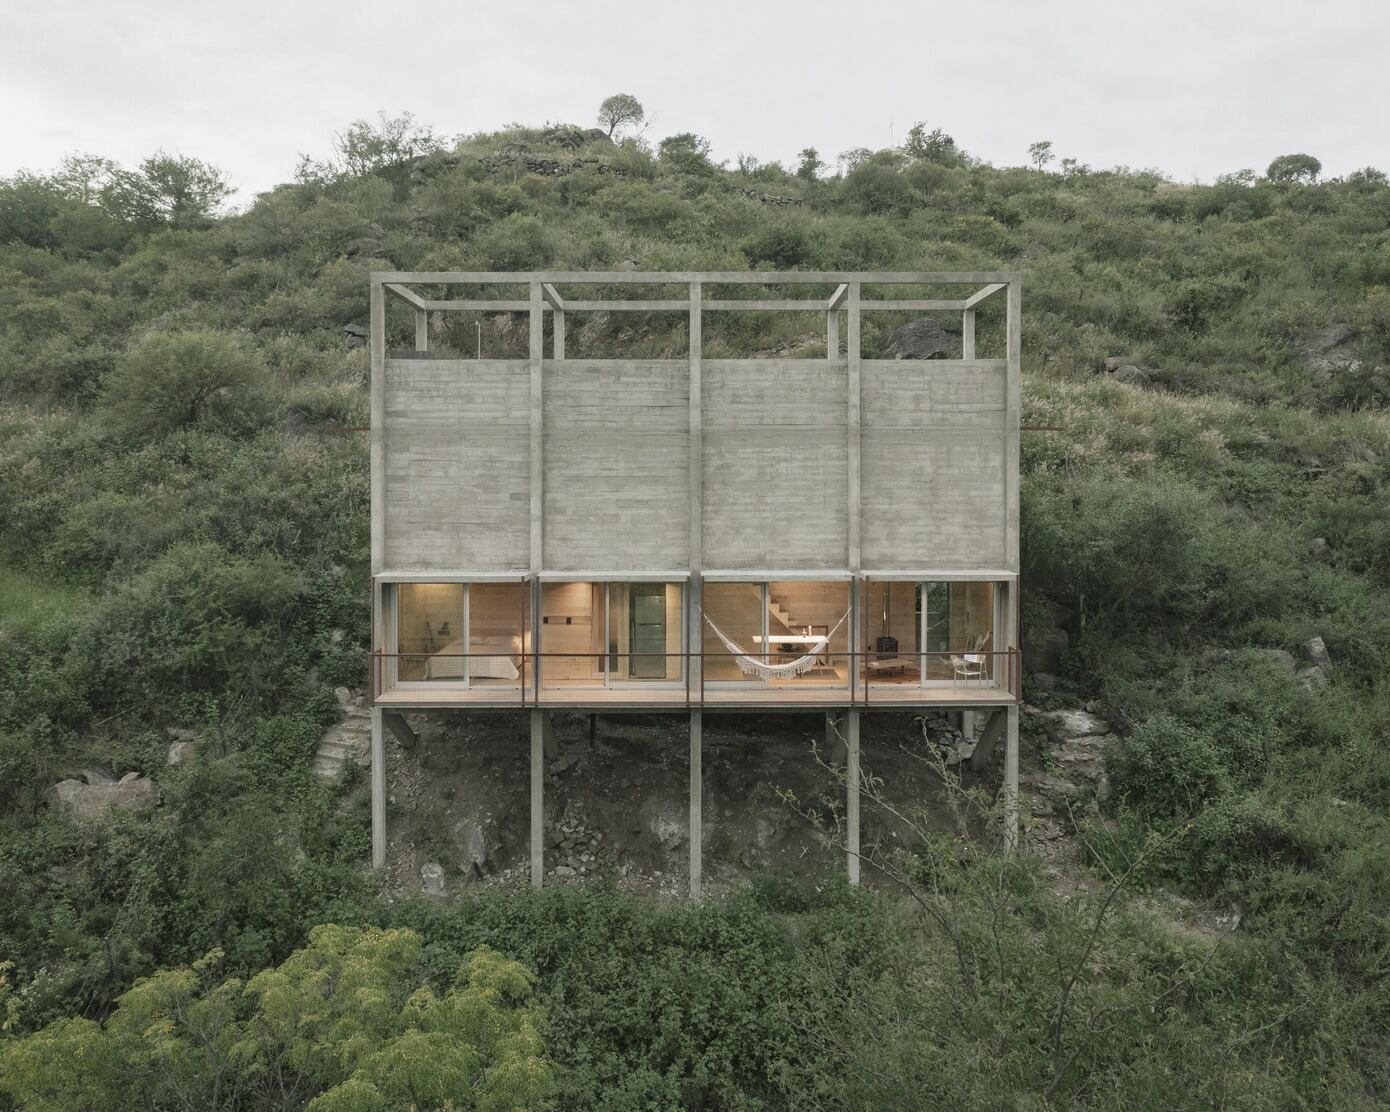 Casa Taller: Brutalist Harmony with Nature